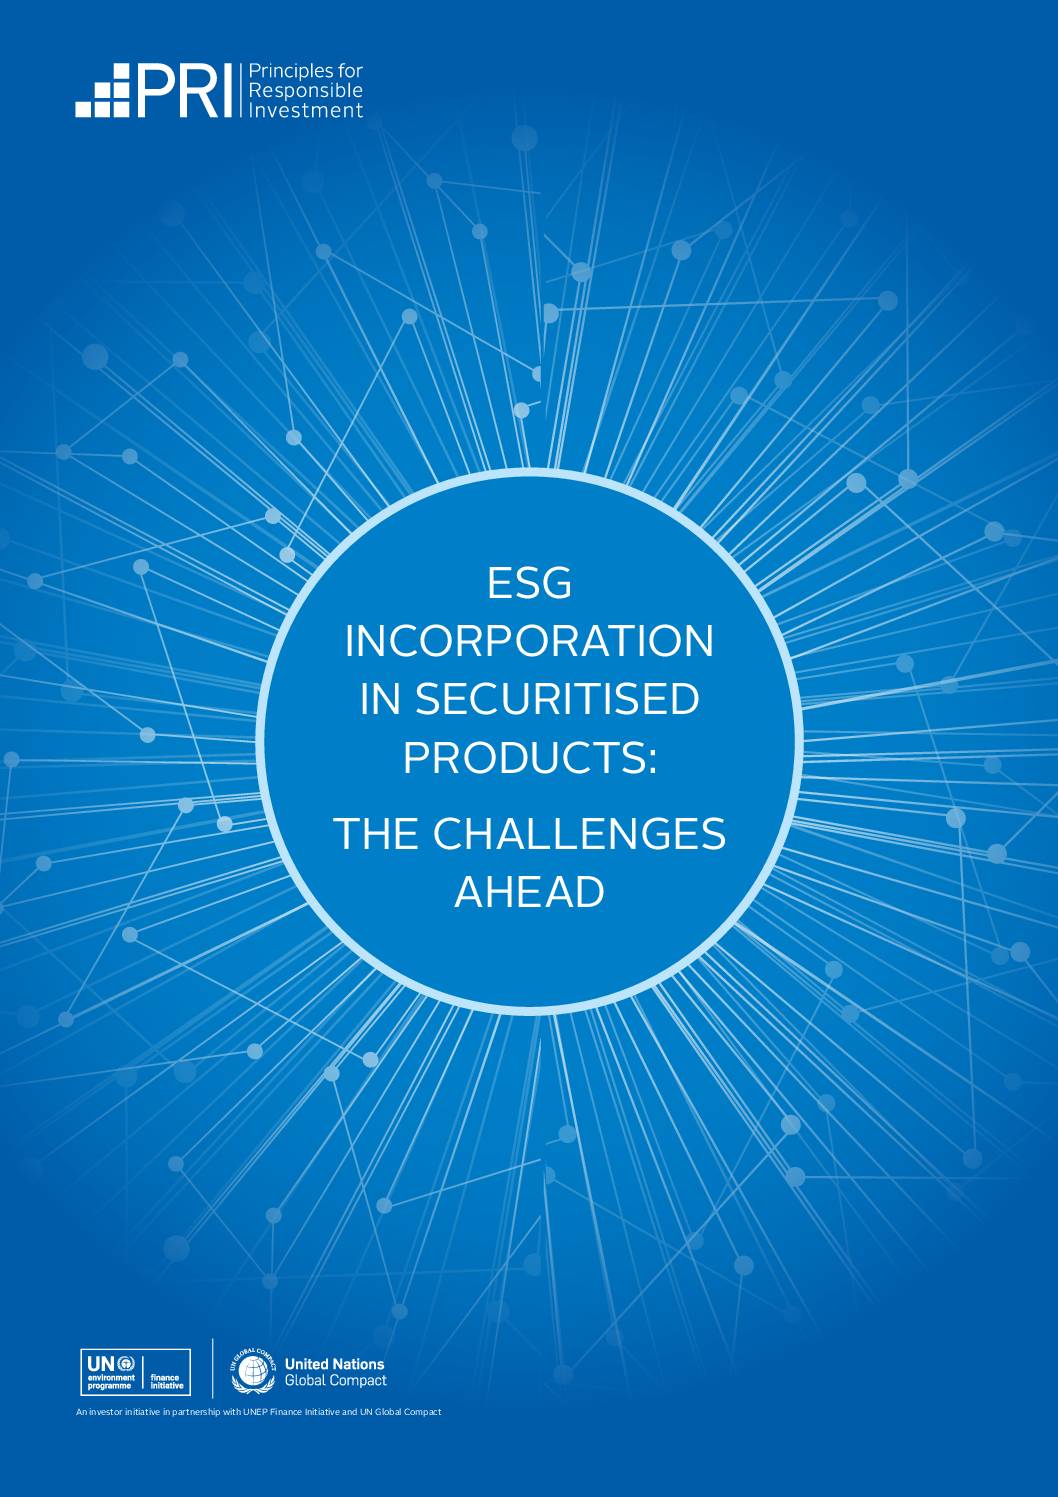 ESG Incorporation in Securitised Products: The Challenges Ahead